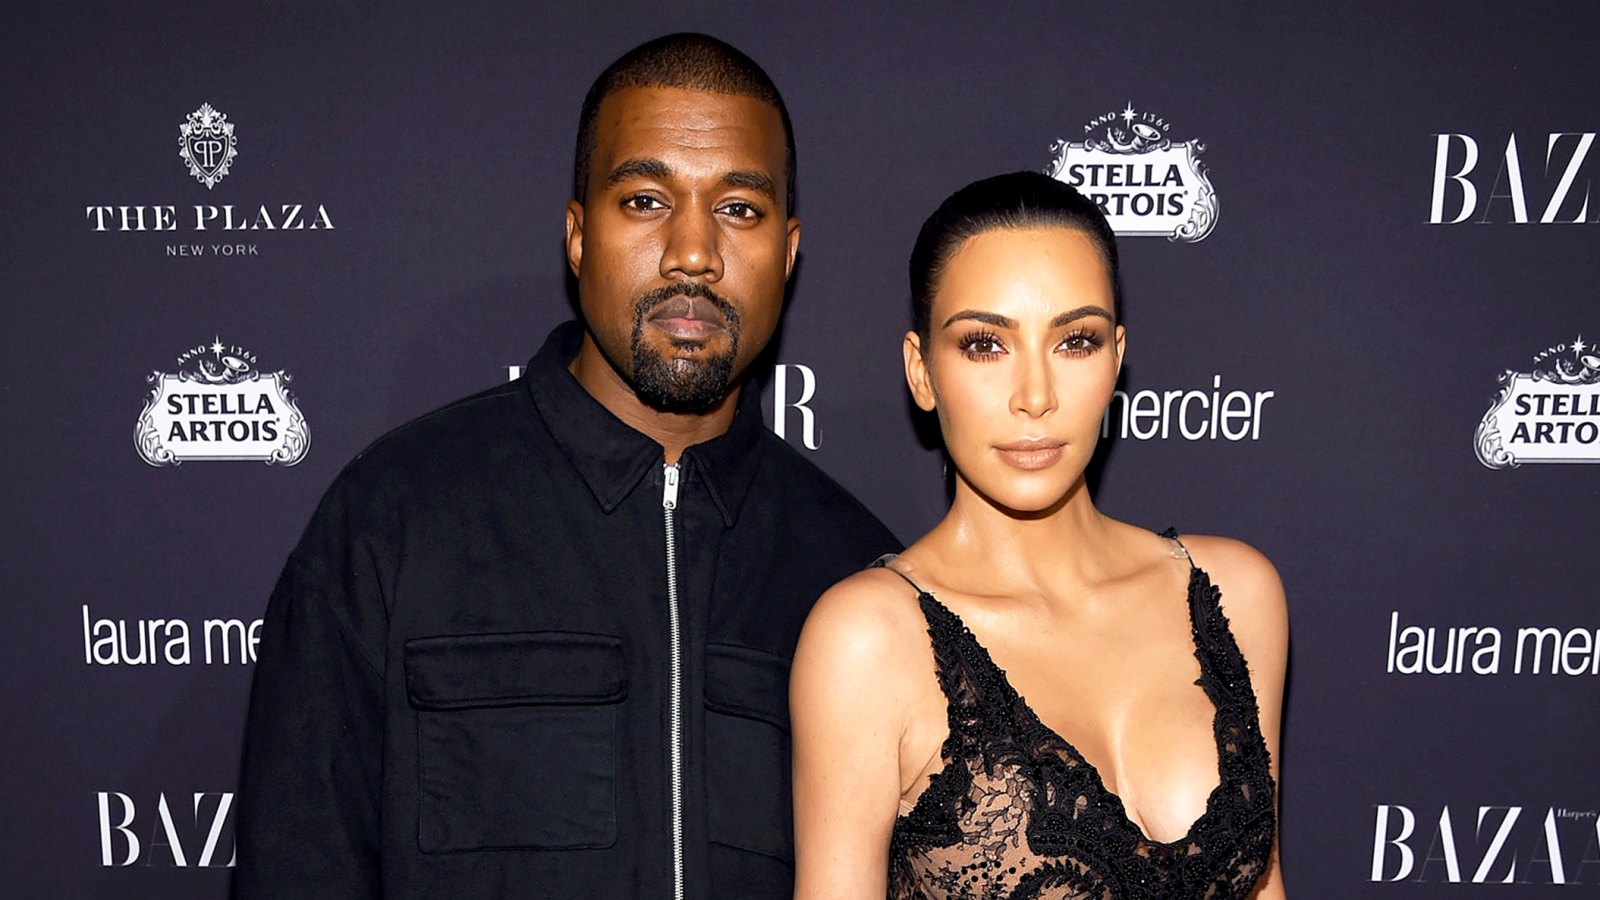 Kanye West and Kim Kardashian attend 2016 Harper's Bazaar's celebration of "ICONS By Carine Roitfeld" at The Plaza Hotel in New York City.